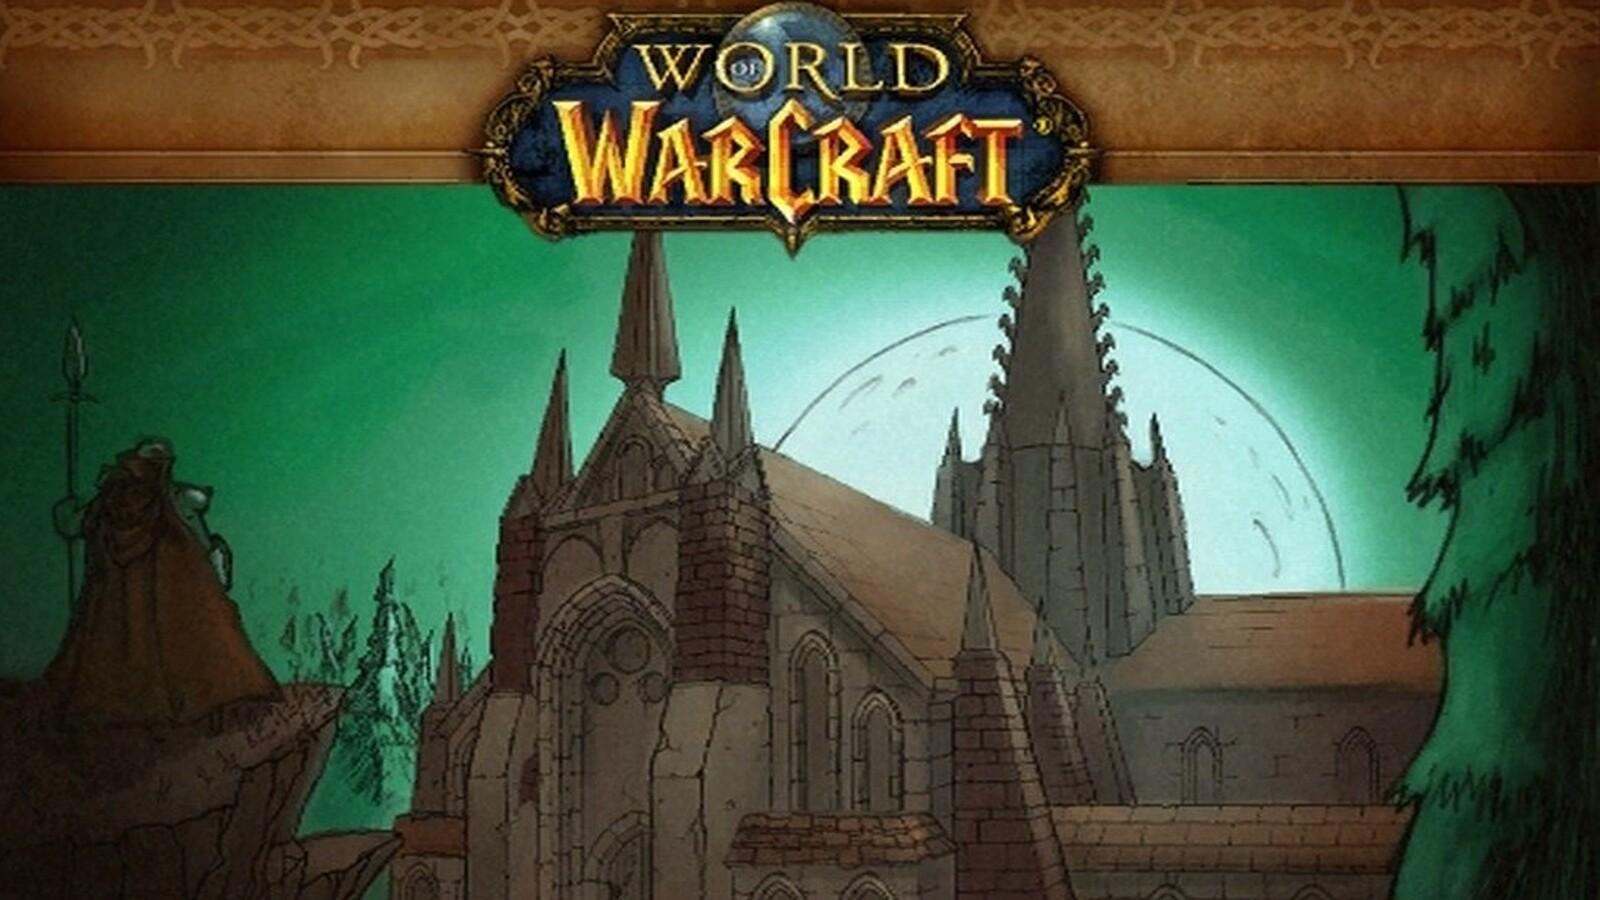 The Scarlet Monastery splash art from the loading screen in WoW Season of Discovery